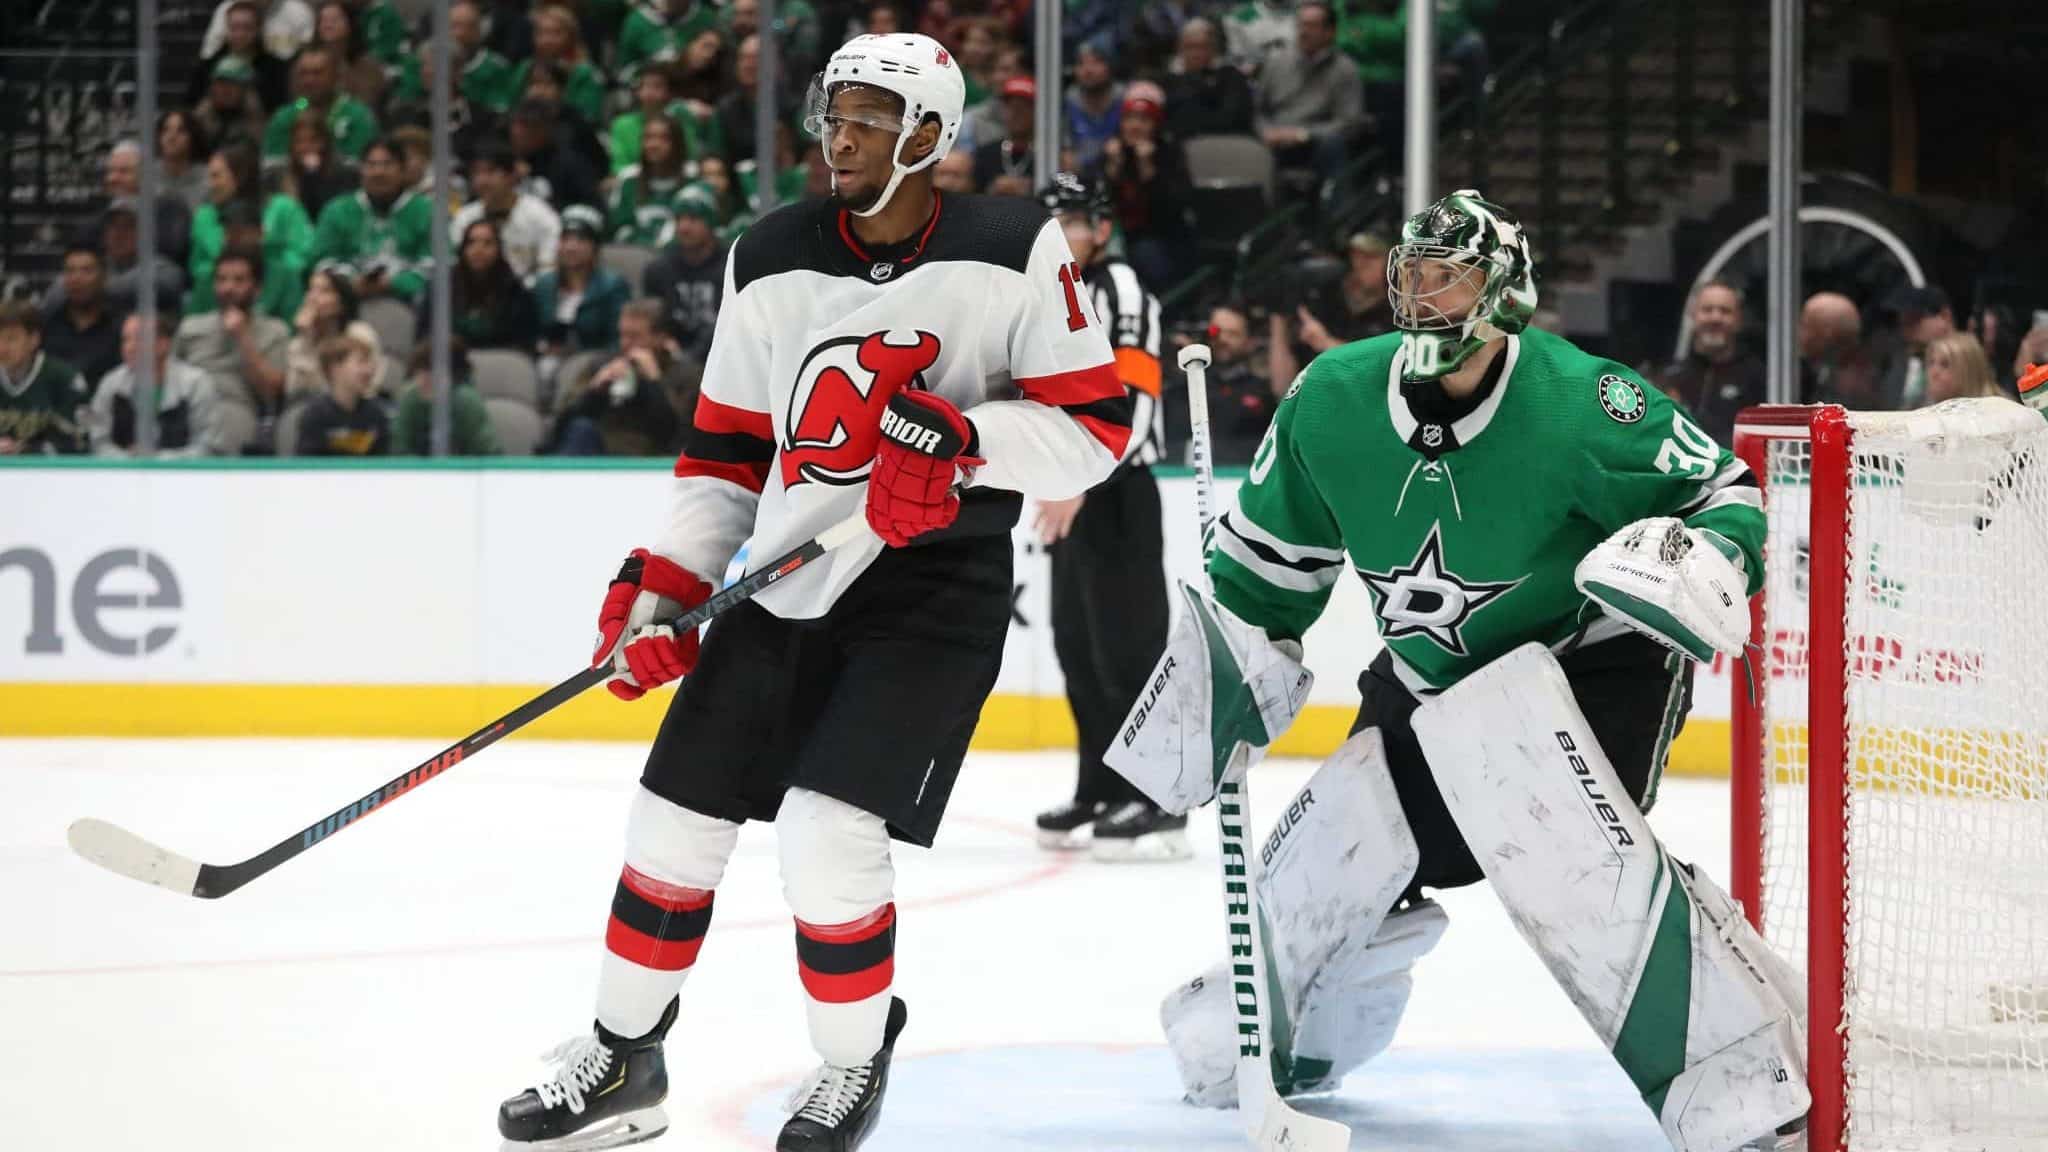 DALLAS, TEXAS - DECEMBER 10: Wayne Simmonds #17 of the New Jersey Devils and Ben Bishop #30 of the Dallas Stars in the second period at American Airlines Center on December 10, 2019 in Dallas, Texas.